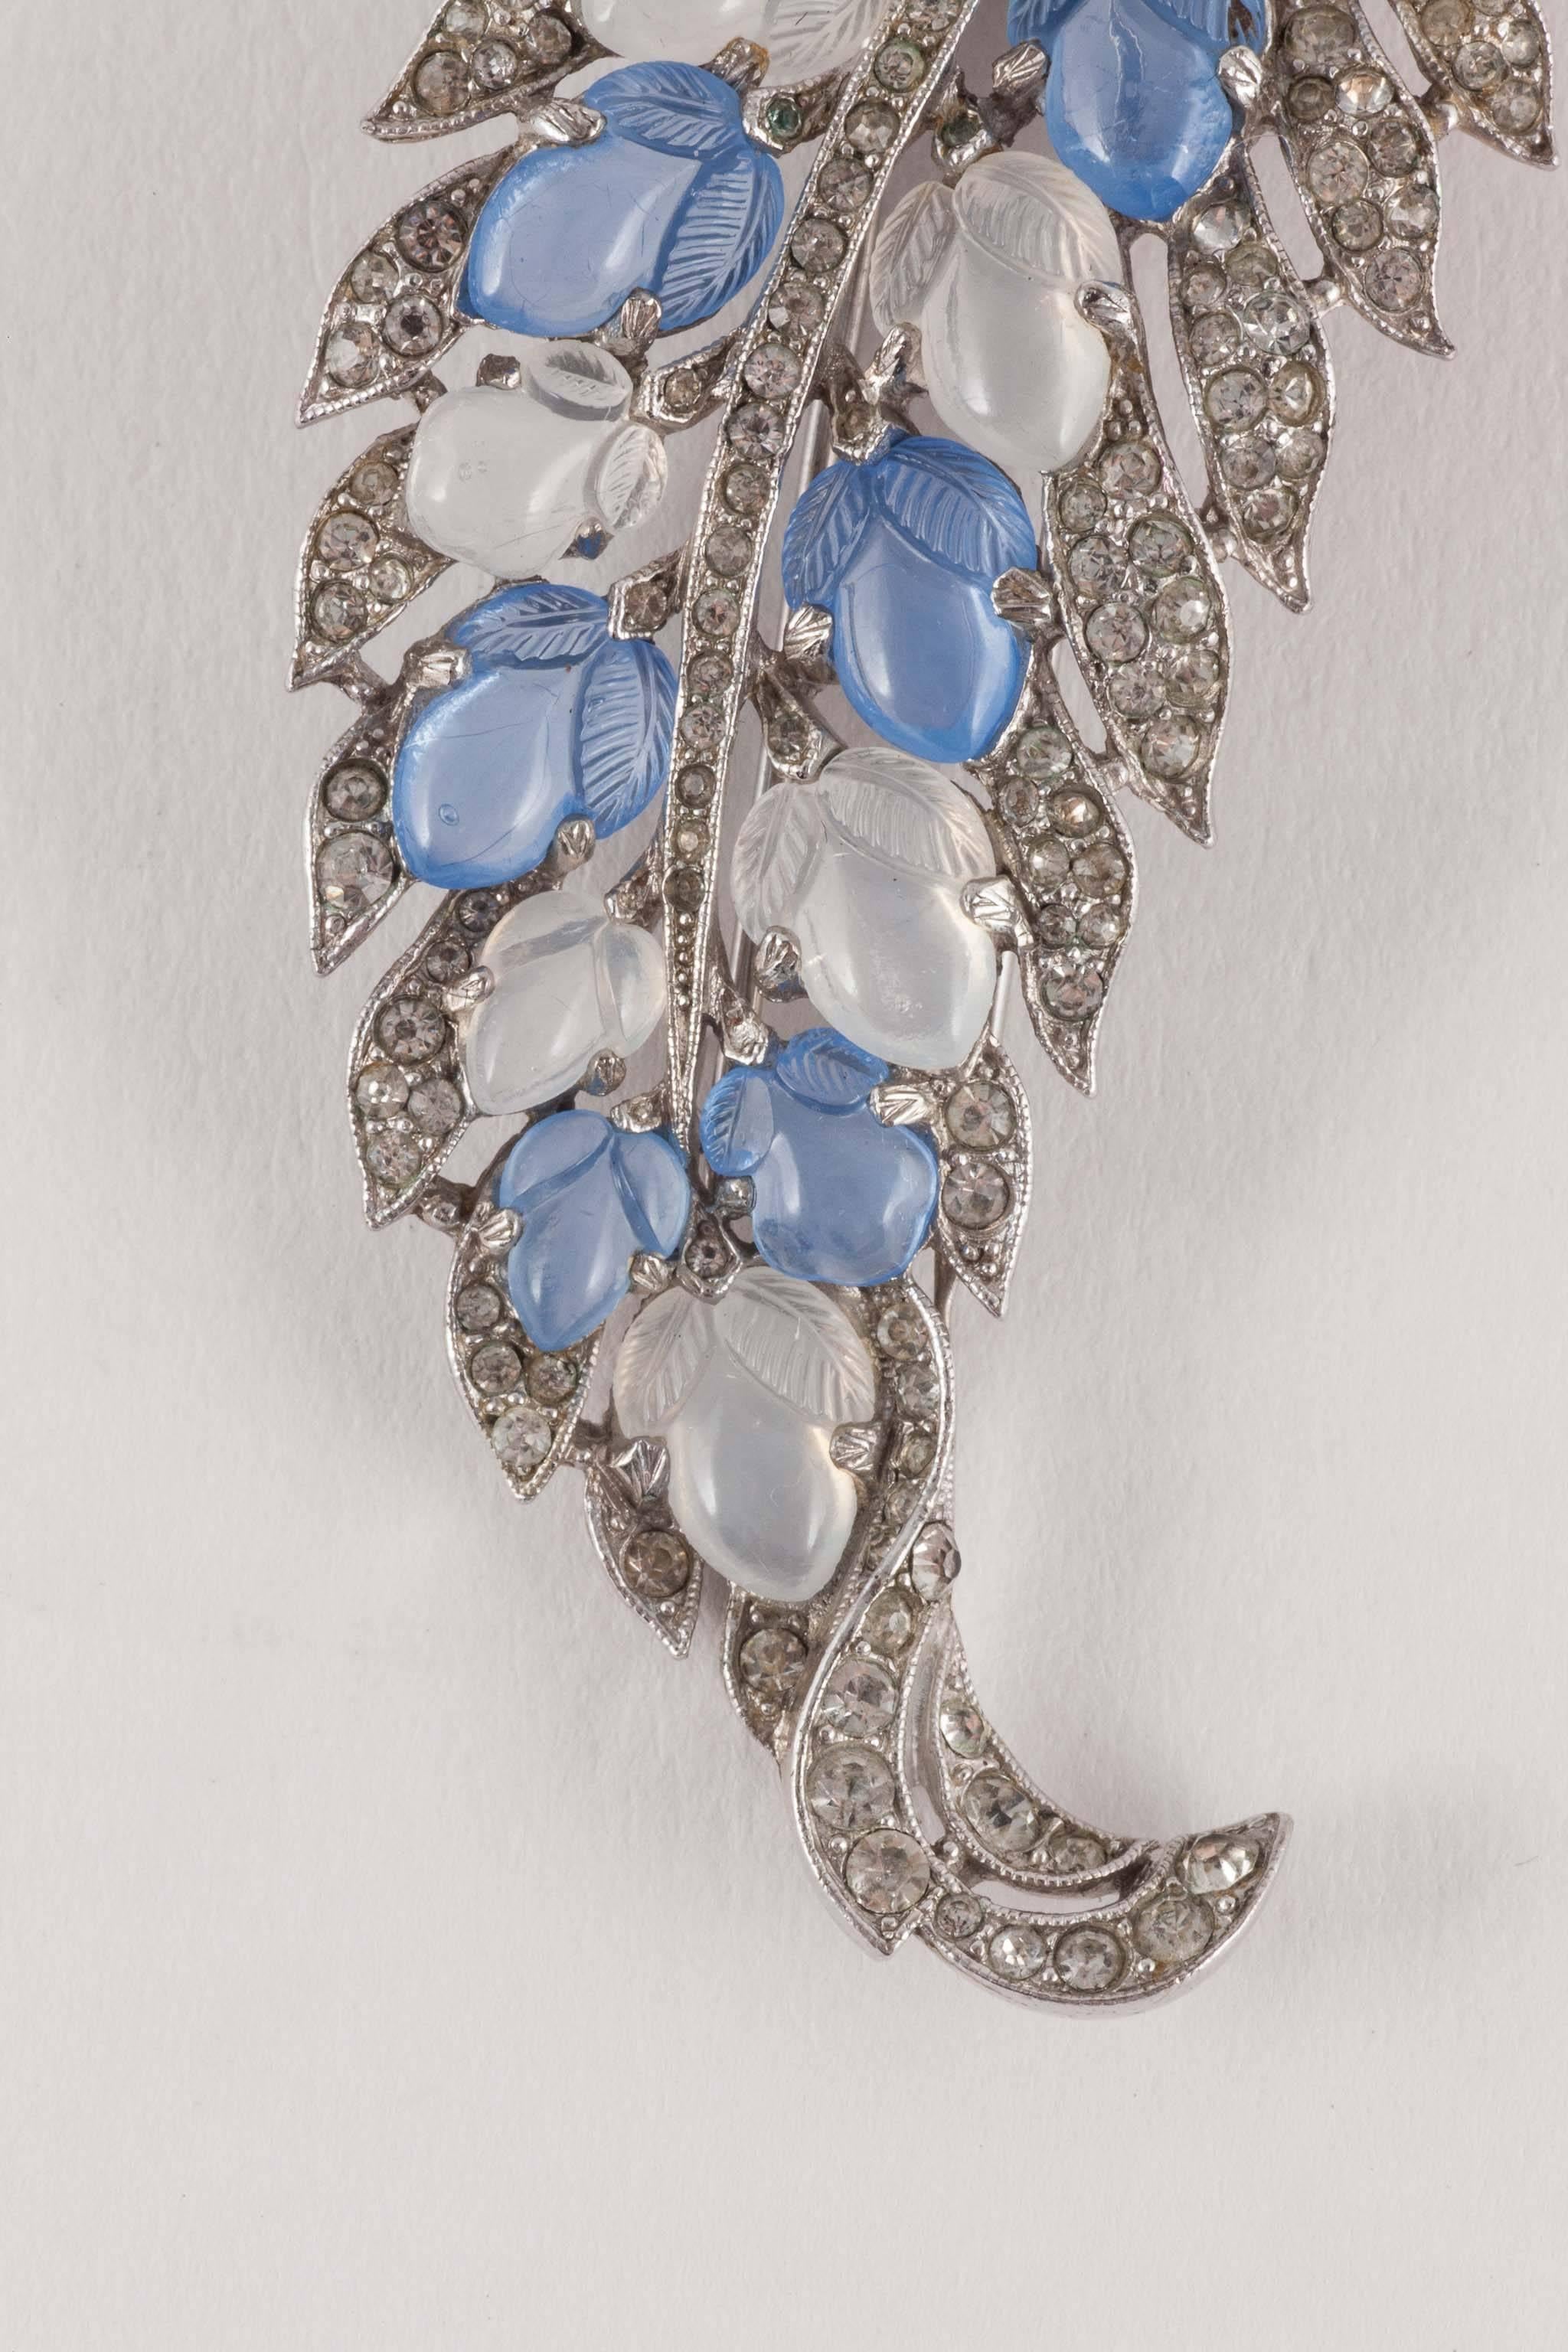 Elegant , stylised brooch (with fur clip fitting) in the form of a 'leaf' , set with 'fruit salad' moulded glass stones, in moonstone and blue chalcedony glass, and paste. Based on iconic Cartier jewels from the 1930s, the Trifari 'fruit salad'